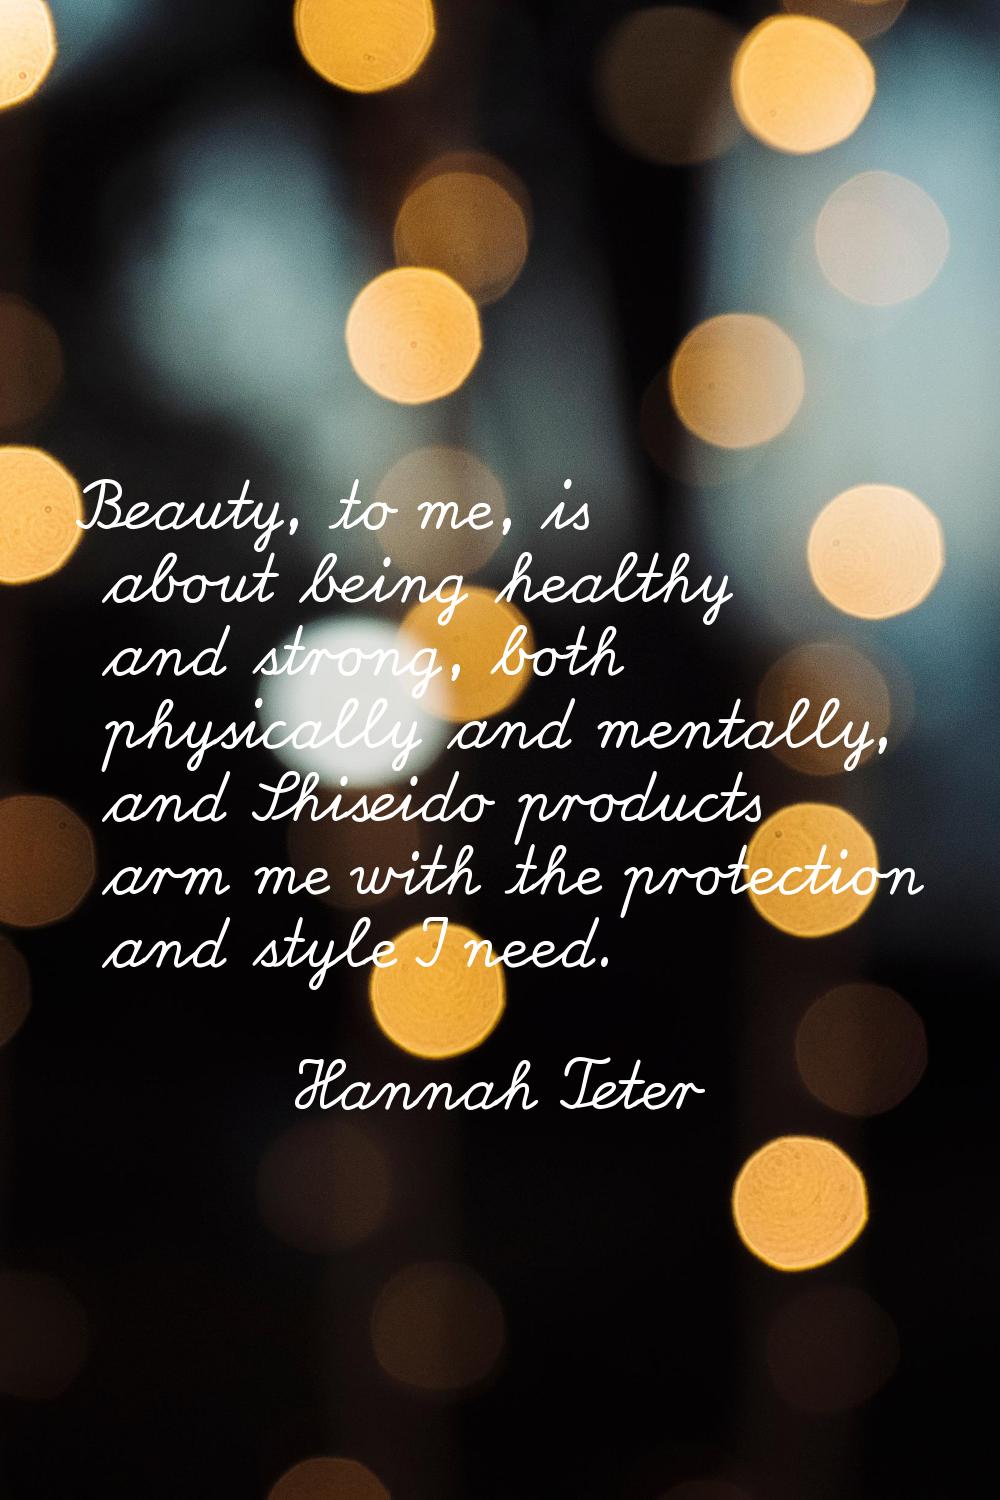 Beauty, to me, is about being healthy and strong, both physically and mentally, and Shiseido produc